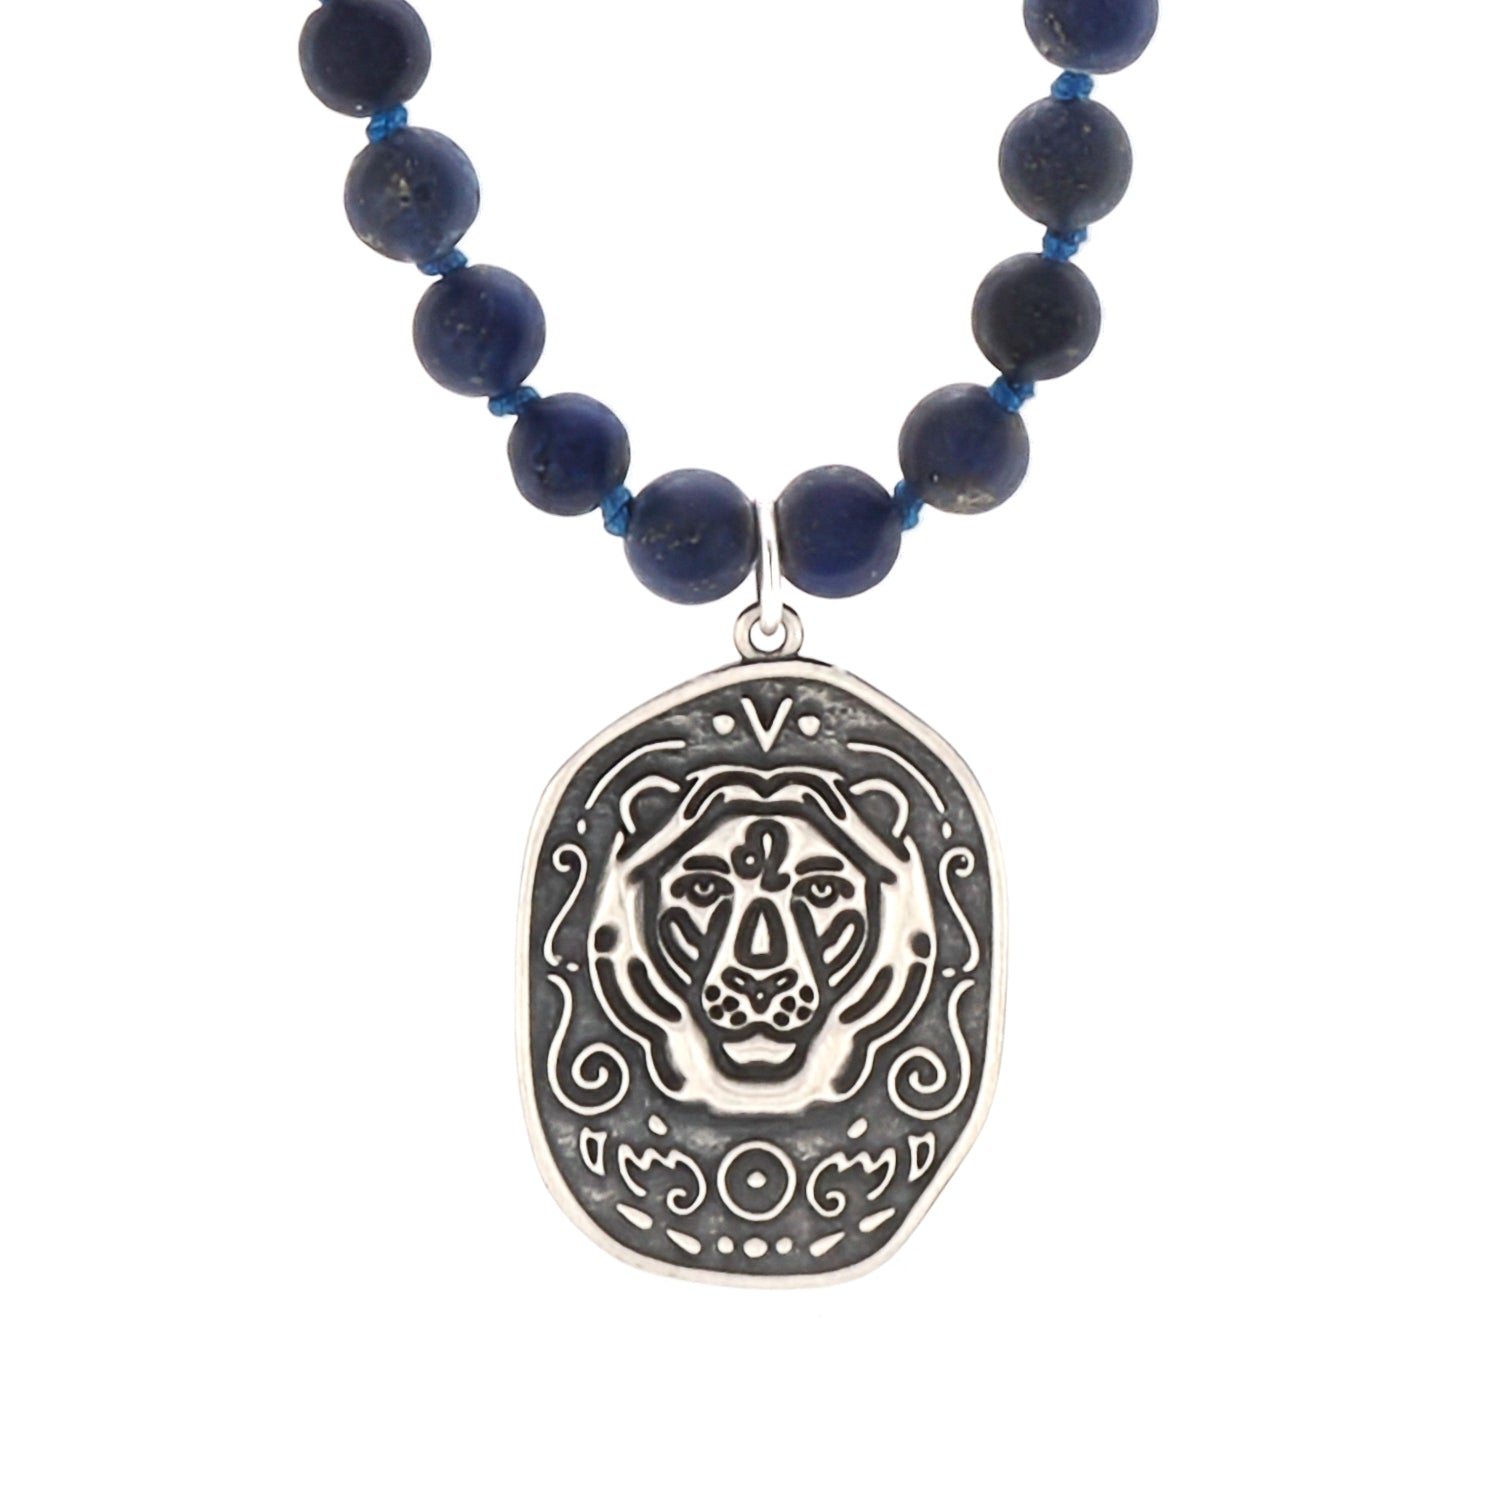 Embrace the power and elegance of the Spiritual Lapis Lazuli Lion necklace, featuring lapis lazuli beads and a sterling silver lion pendant.